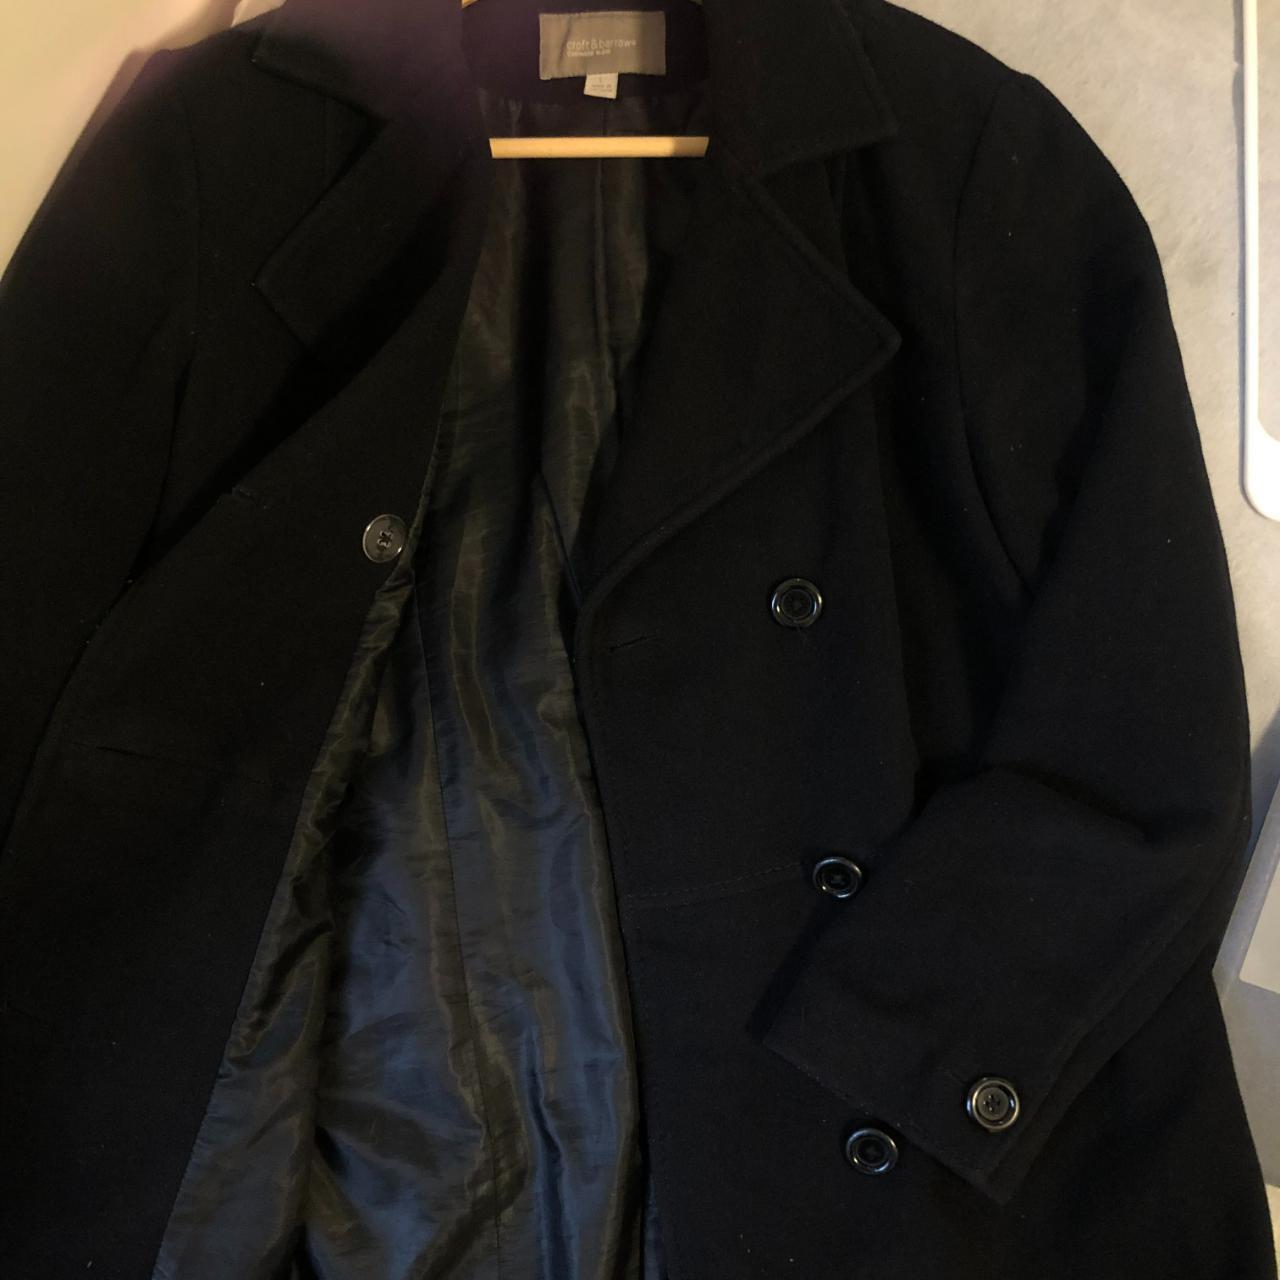 This Croft & Barrow double-breasted peacoat is made... - Depop